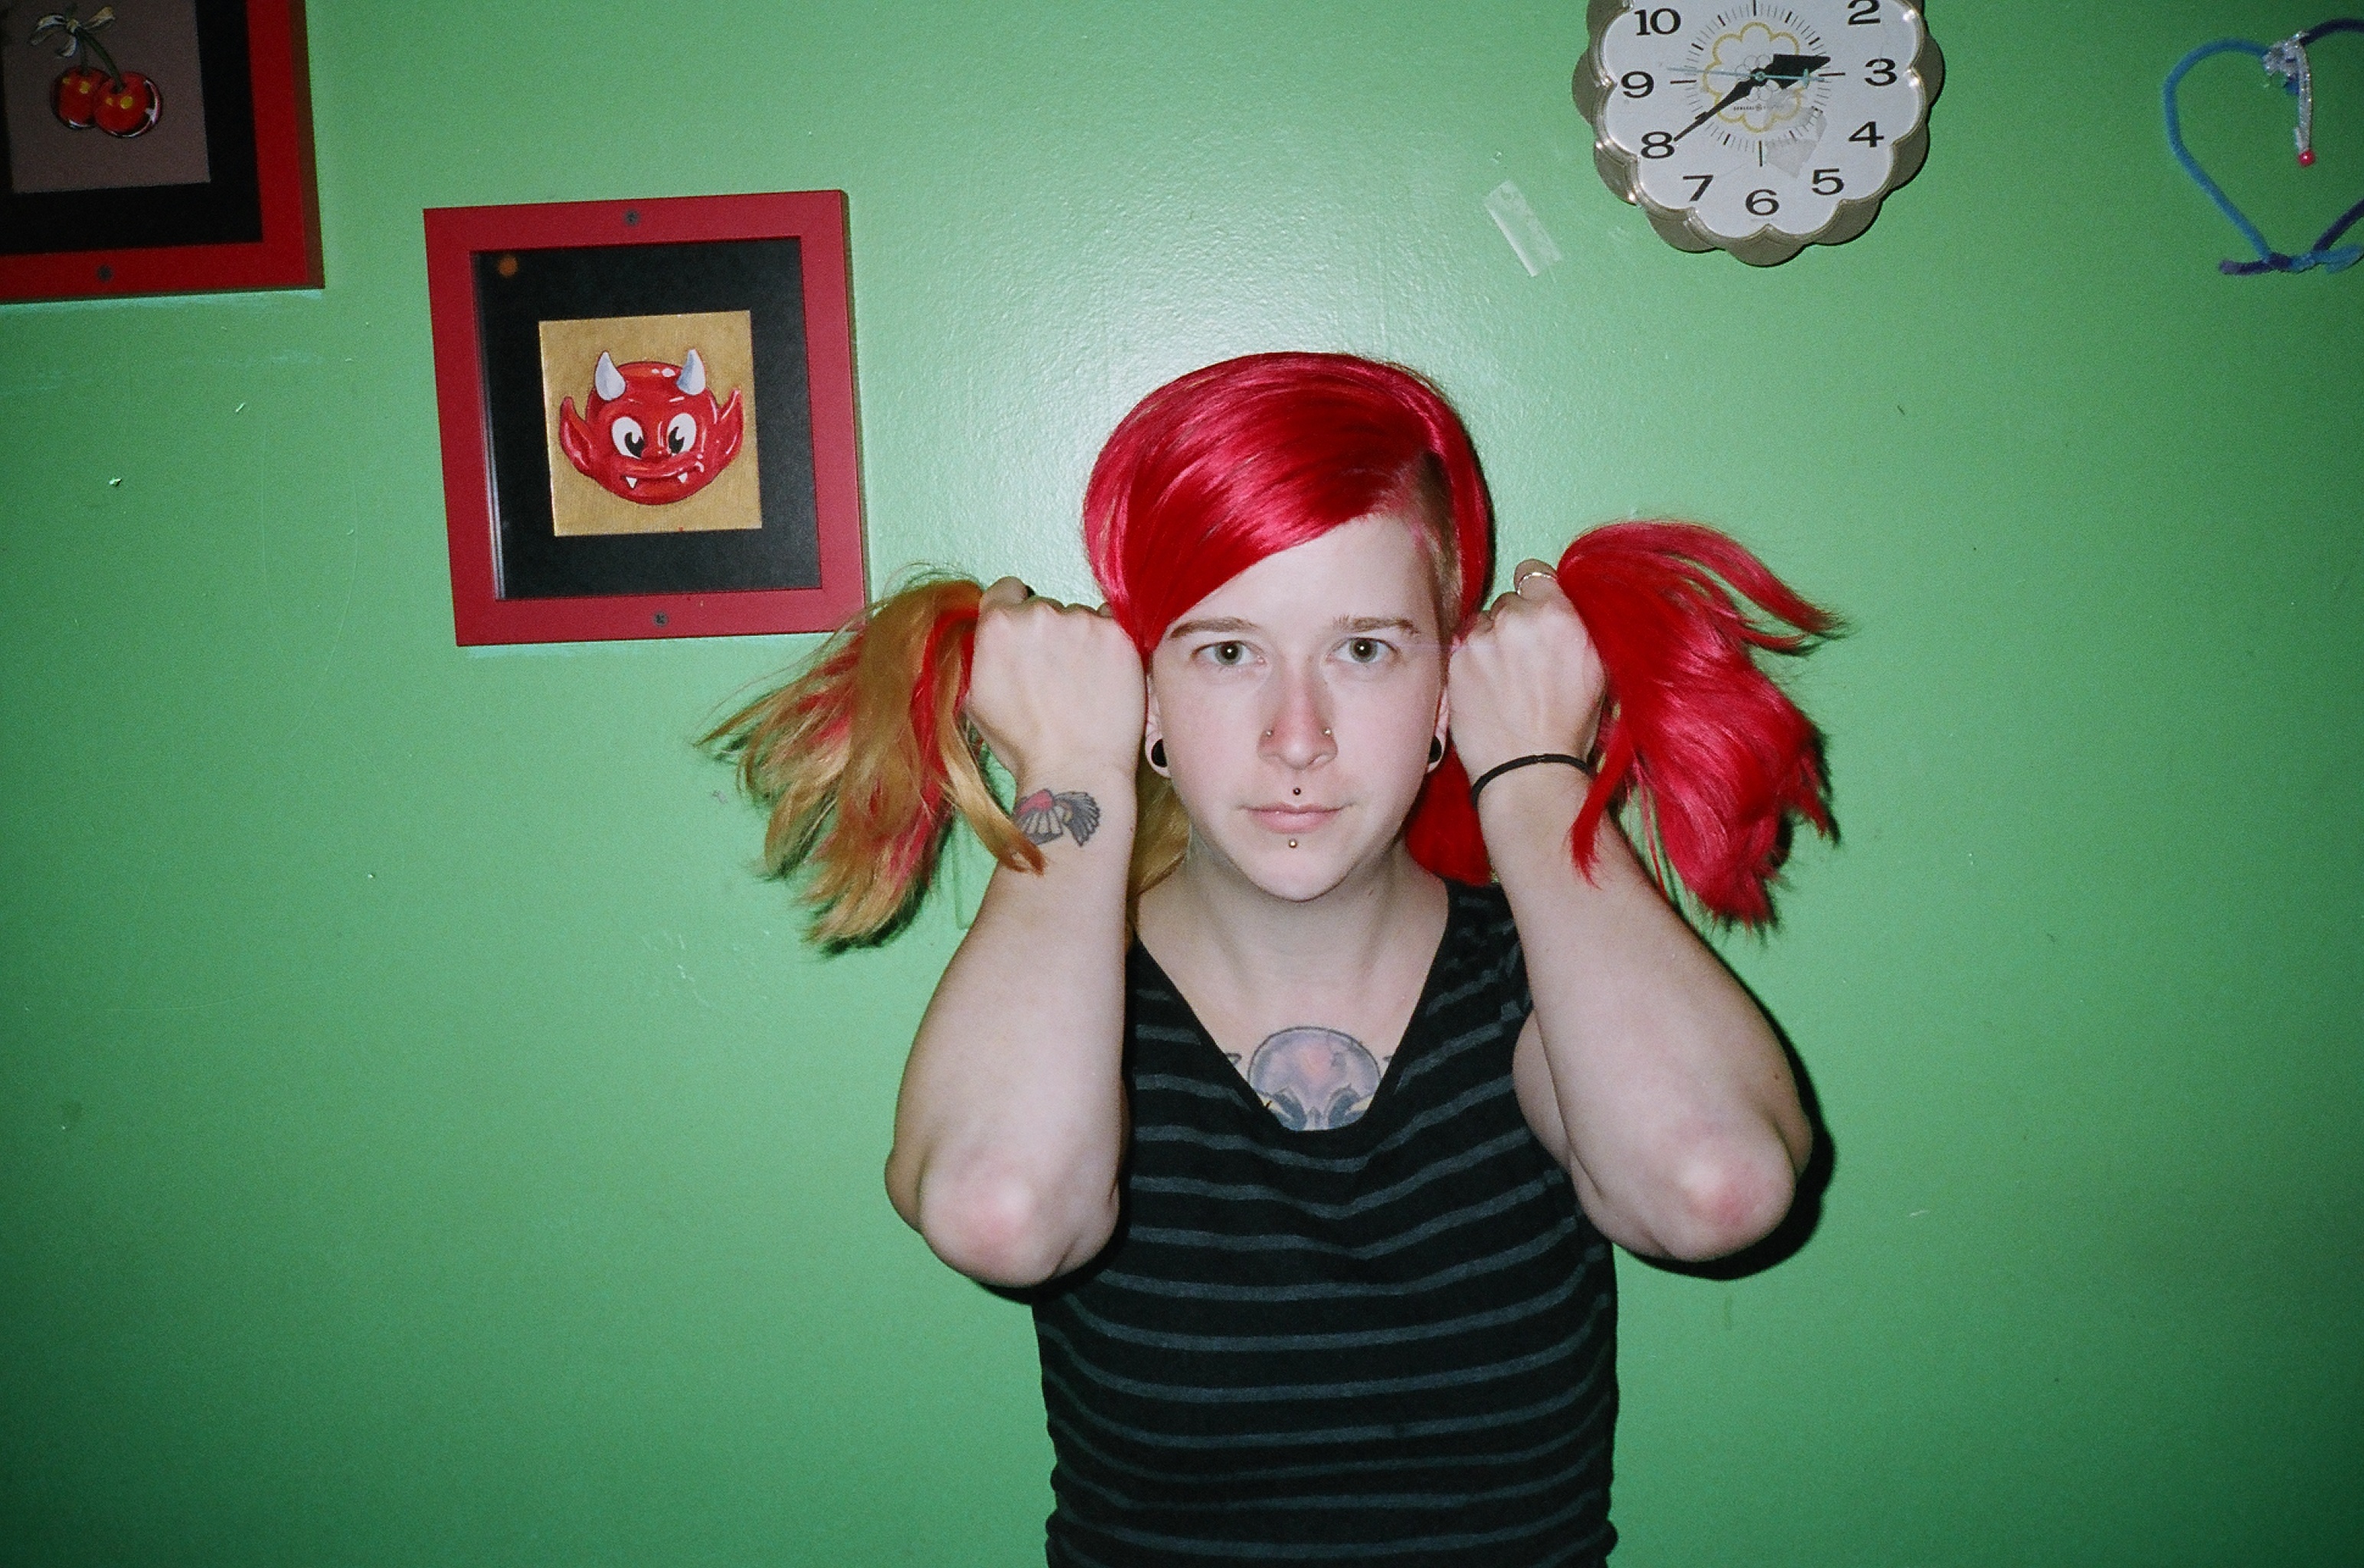 Girl with red pigtails. Philadelphia, 2013